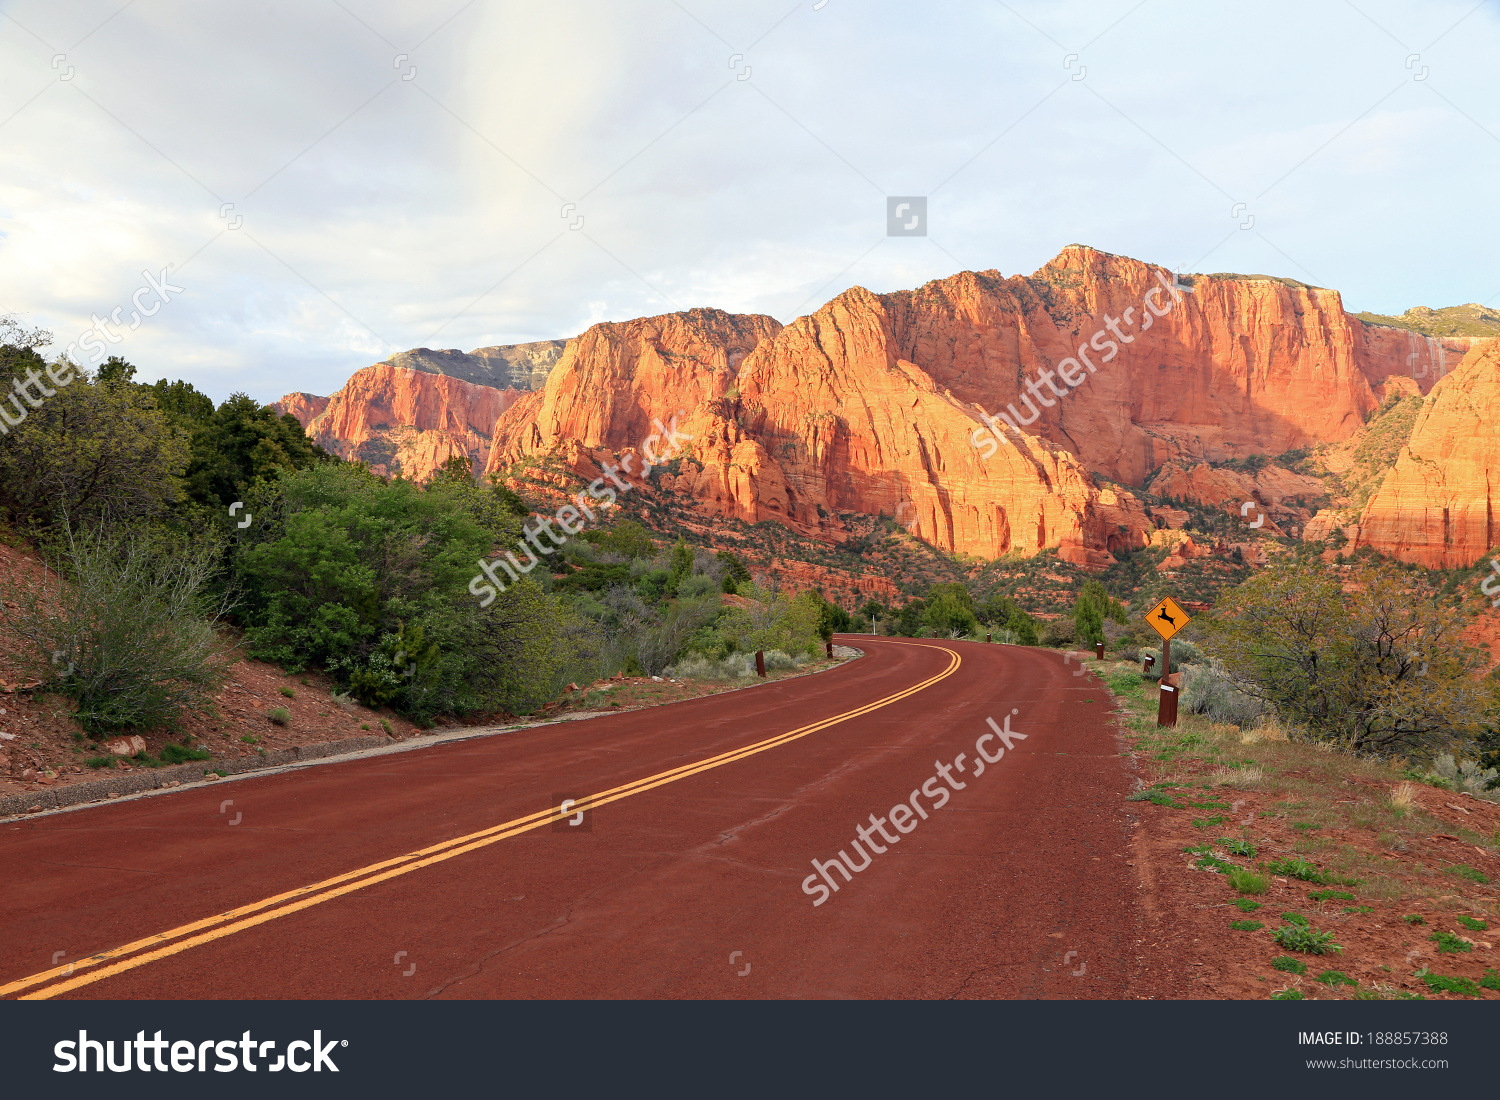 Zion National Park clipart #5, Download drawings